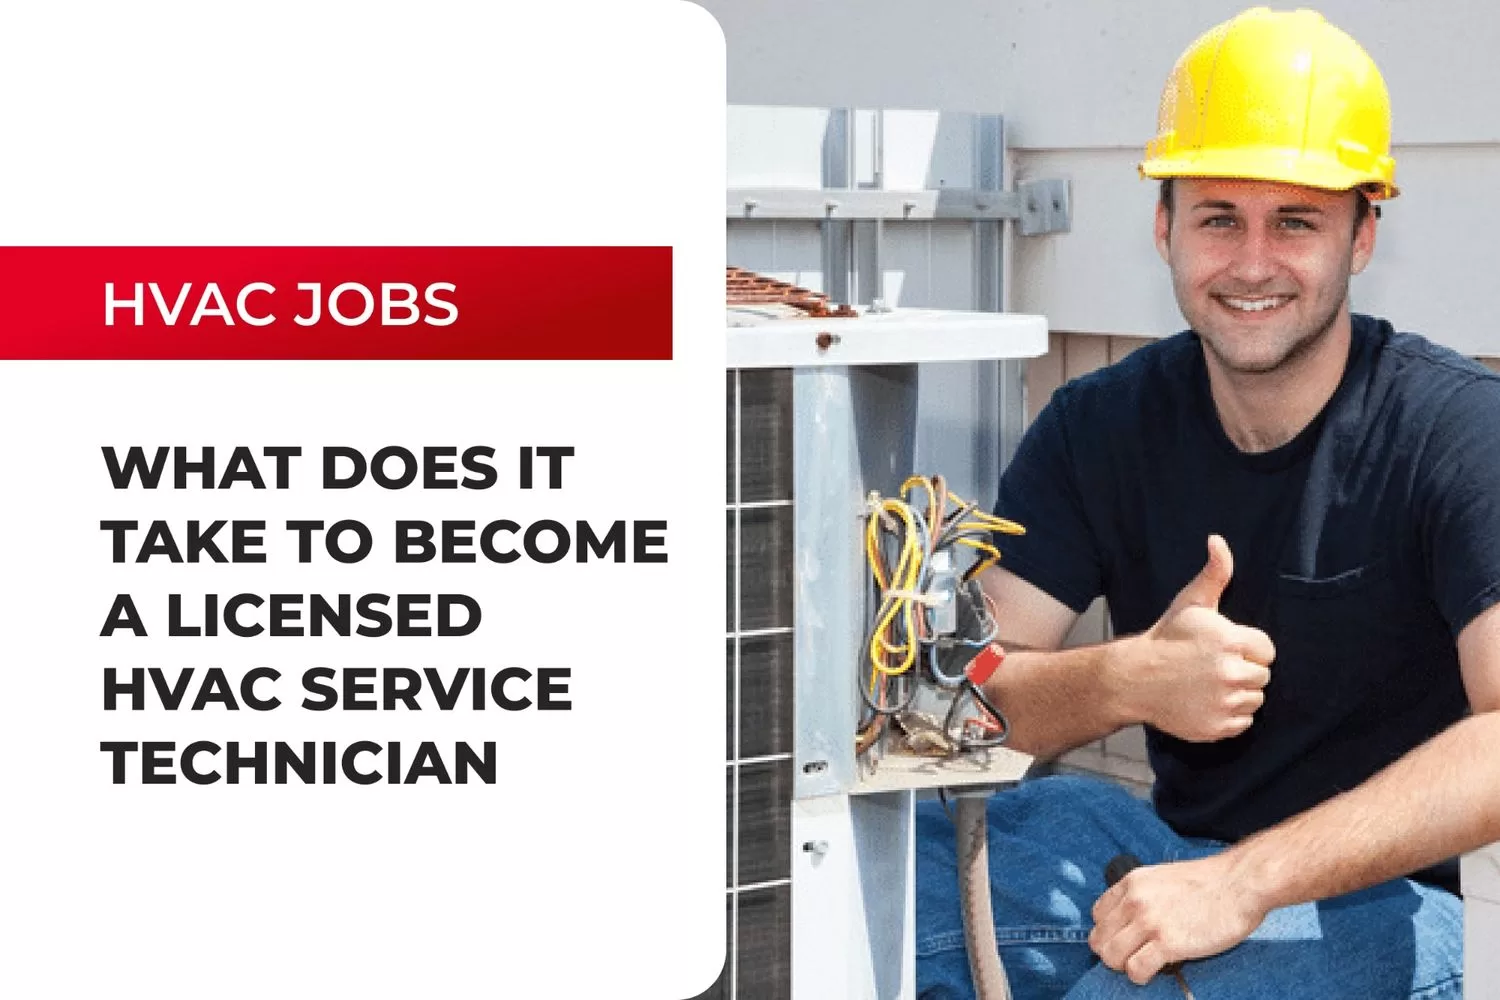 What Does It Take to Become a Licensed HVAC Service Technician?